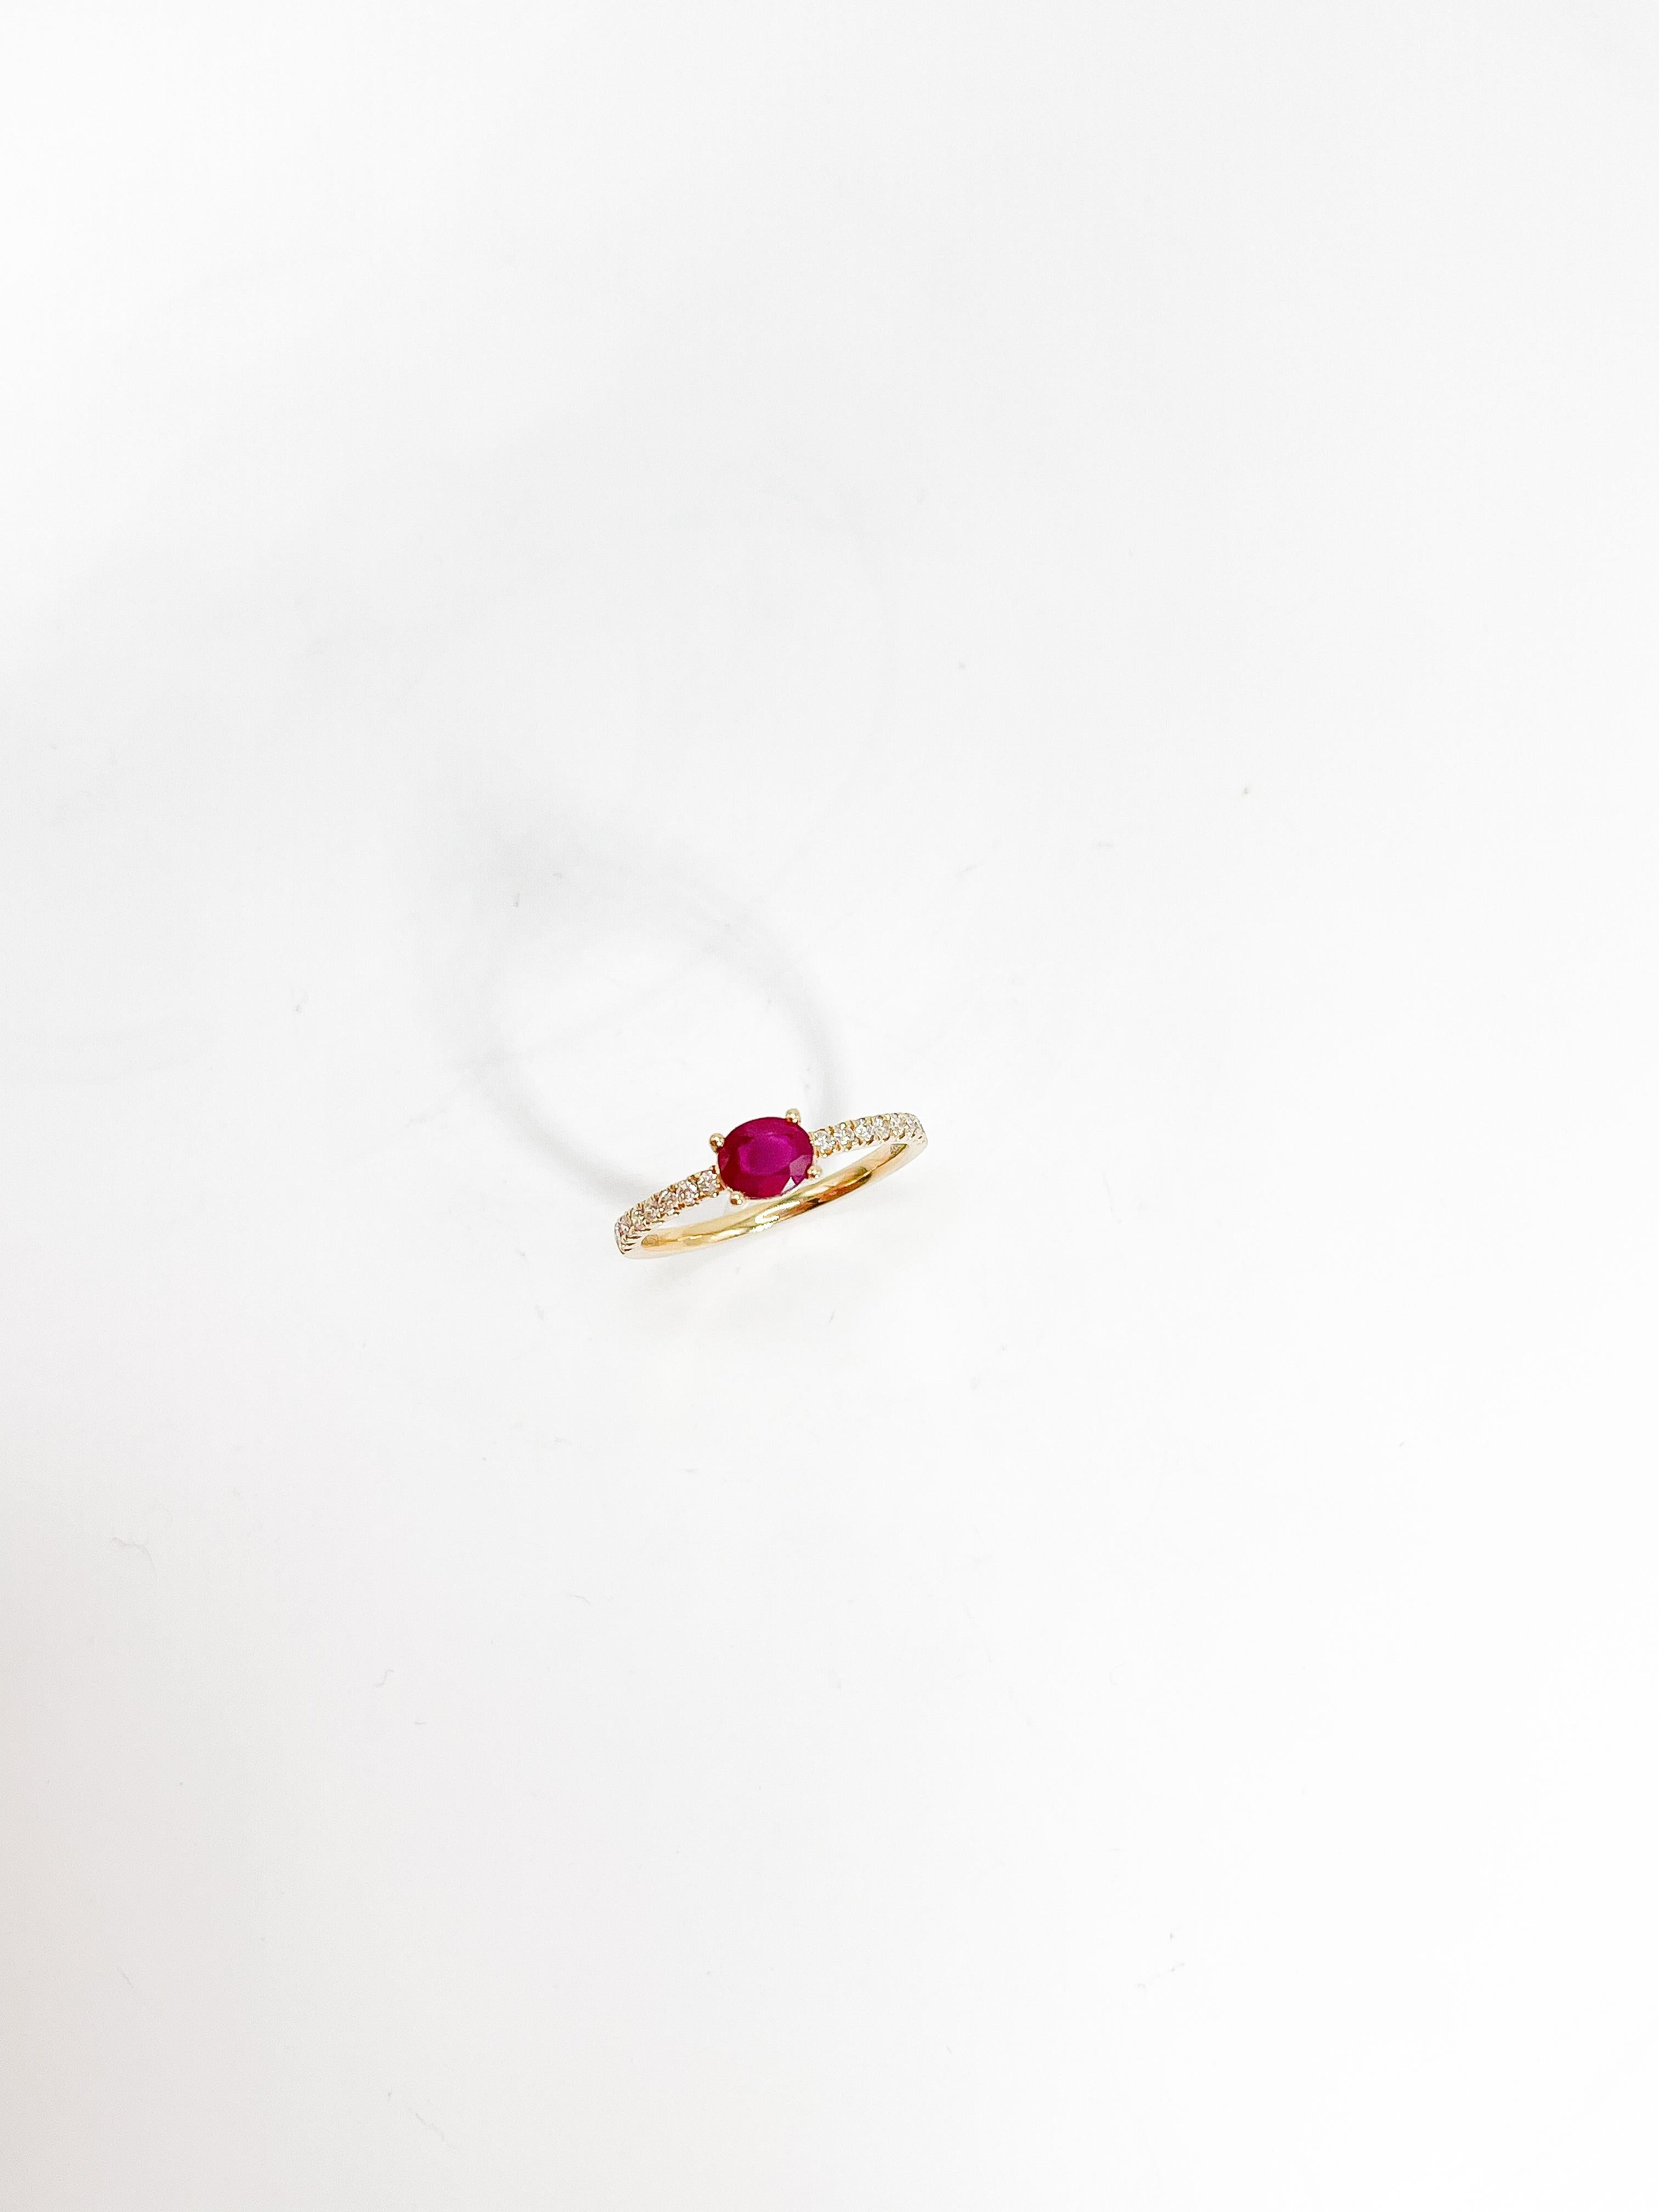 14k yellow gold .82 ruby and .19 diamond Ring. This ring has an oval ruby going east to west with diamond side stones that go halfway. Ring is a size 7, the width of the ring is 4.7 mm and has a weight of 1.77 grams.